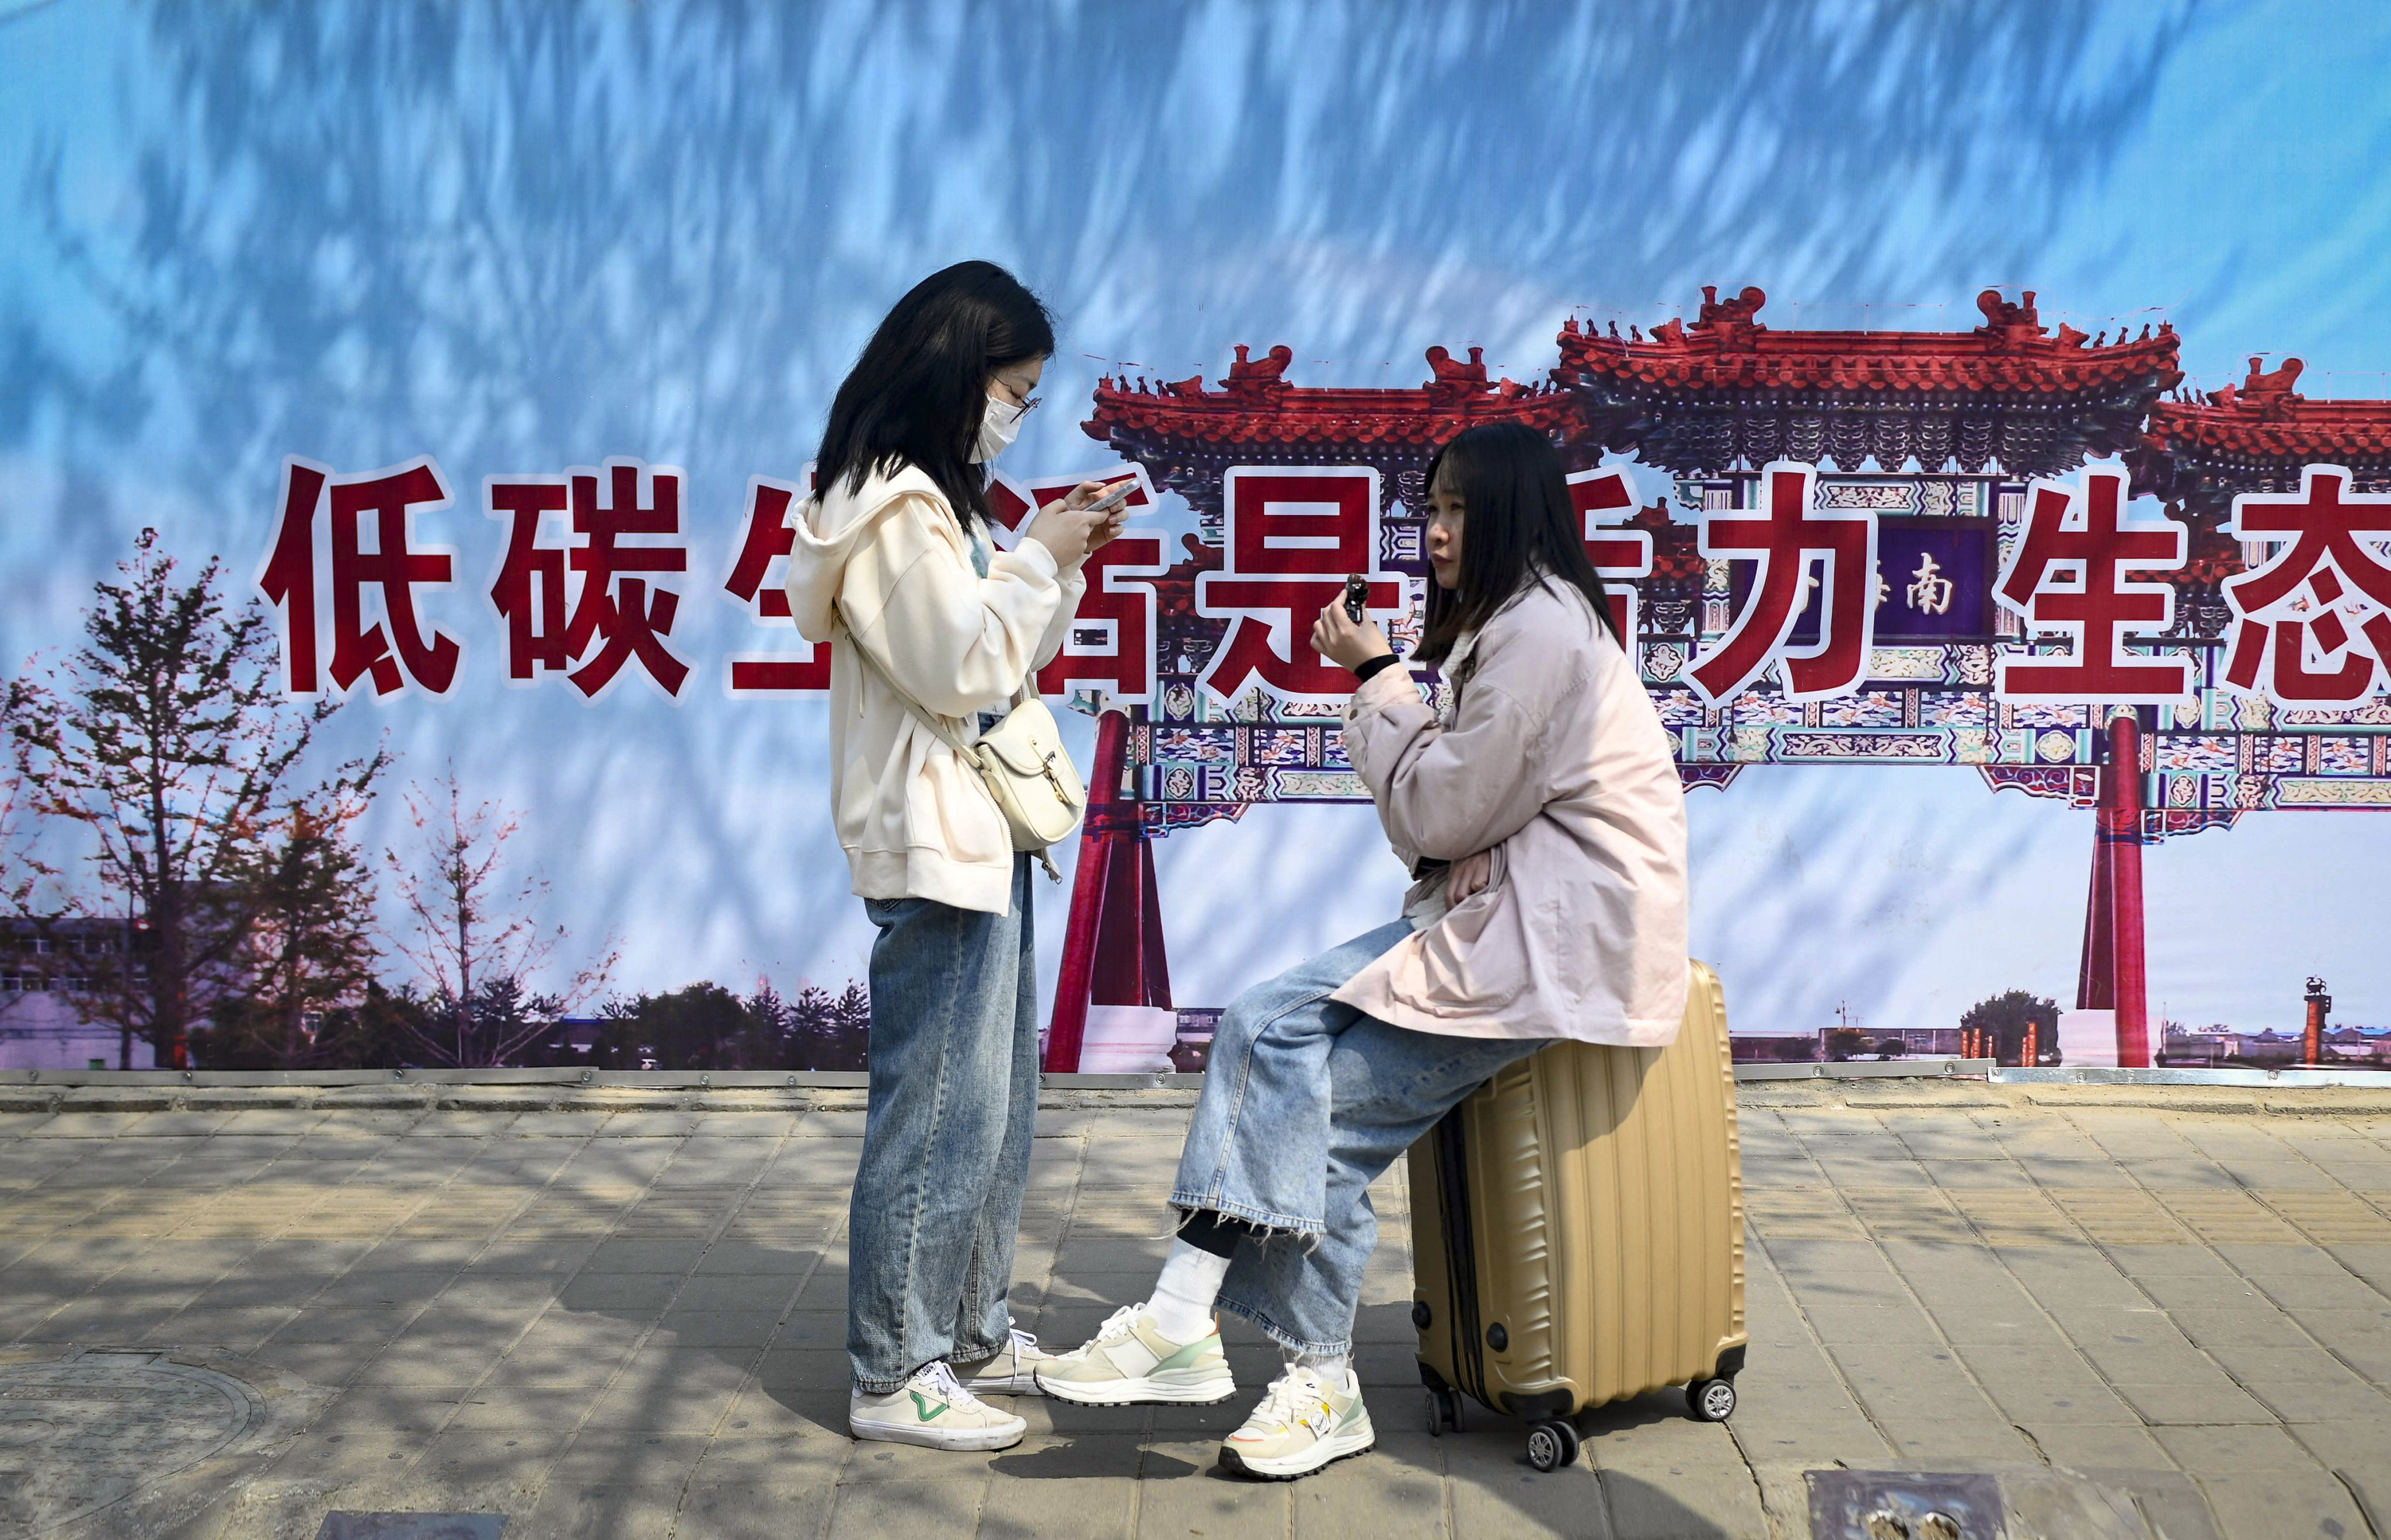 People wait at a bus stop in Beijing with a slogan promoting low-carbon living in Beijing. Photo: AFP